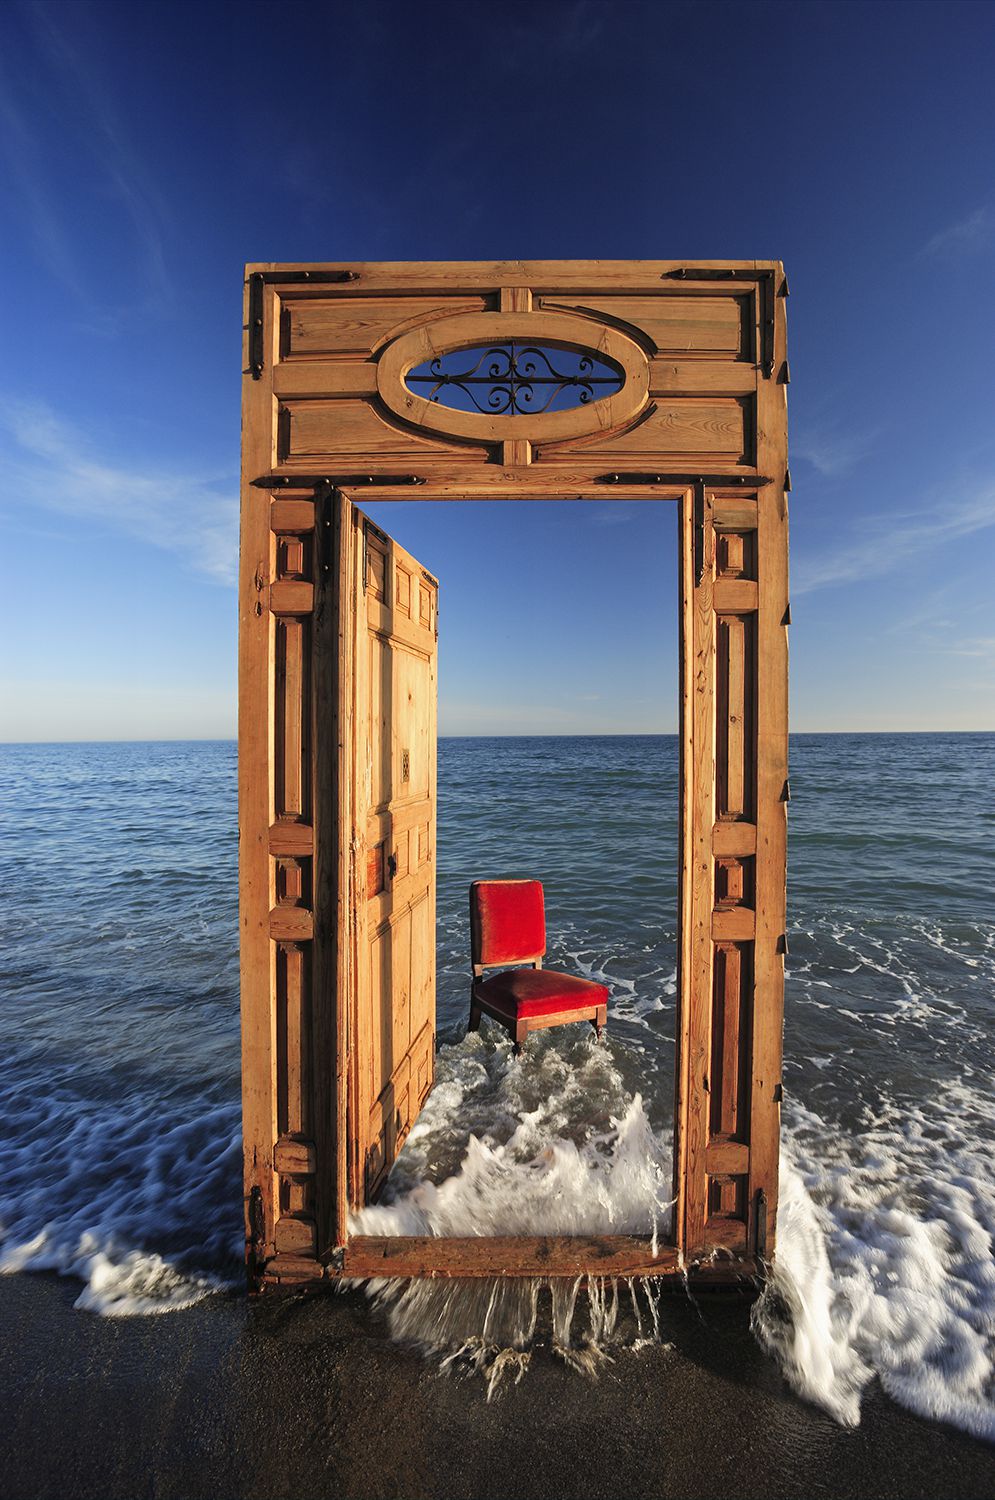 Wayne Chasan Hospitality, Architecture, Hotel Resorts, Lifestyle, Landscape, Editorial,  Environmental CSR Social Enterprise Lifestyle Photographer Photography Local, Regional, Global Hotel Resort, Holiday, Luxury, Front Cover Magazine creative image of wooden door frame in the sea with a red chair